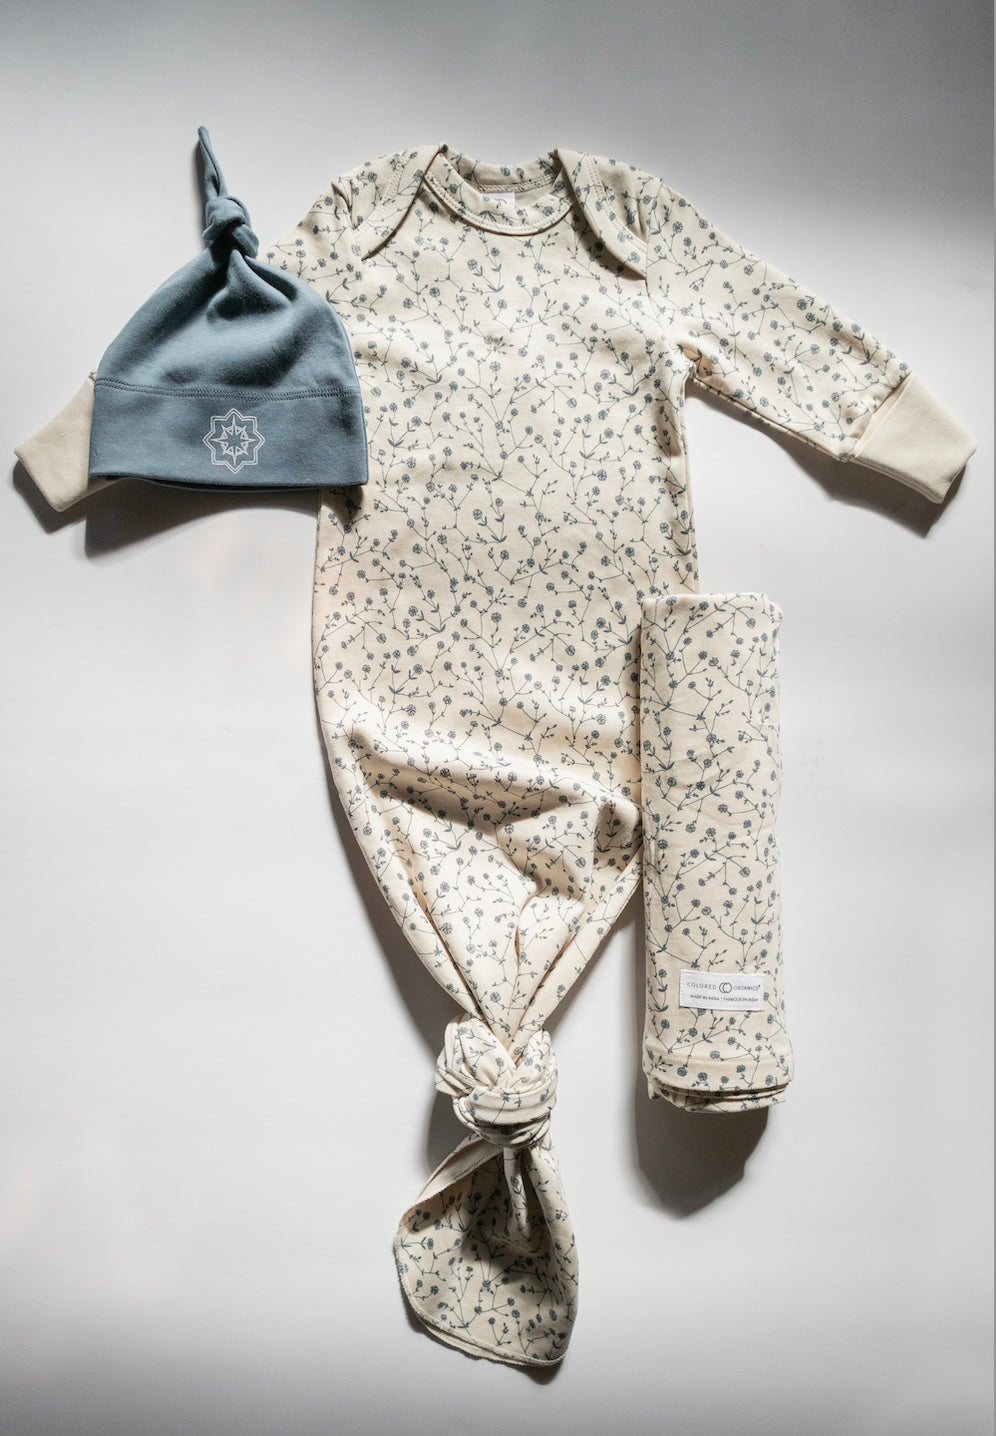 Floral Blue Organic Sleeper, Hat, and Swaddle Set